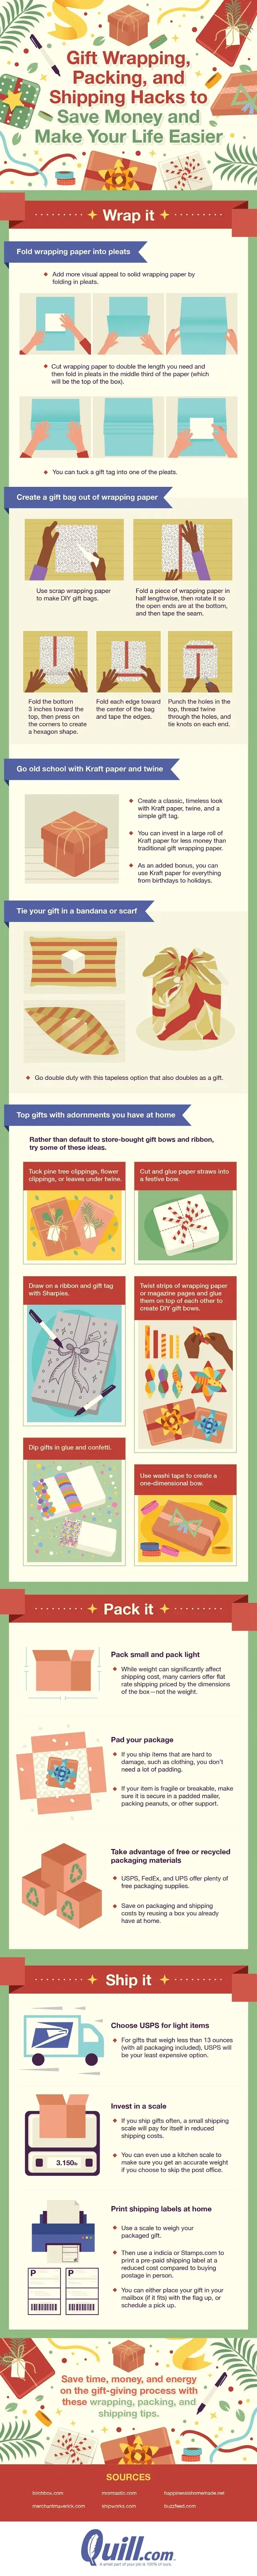 This Is How to Wrap Your Gifts Like a Pro [infographic]